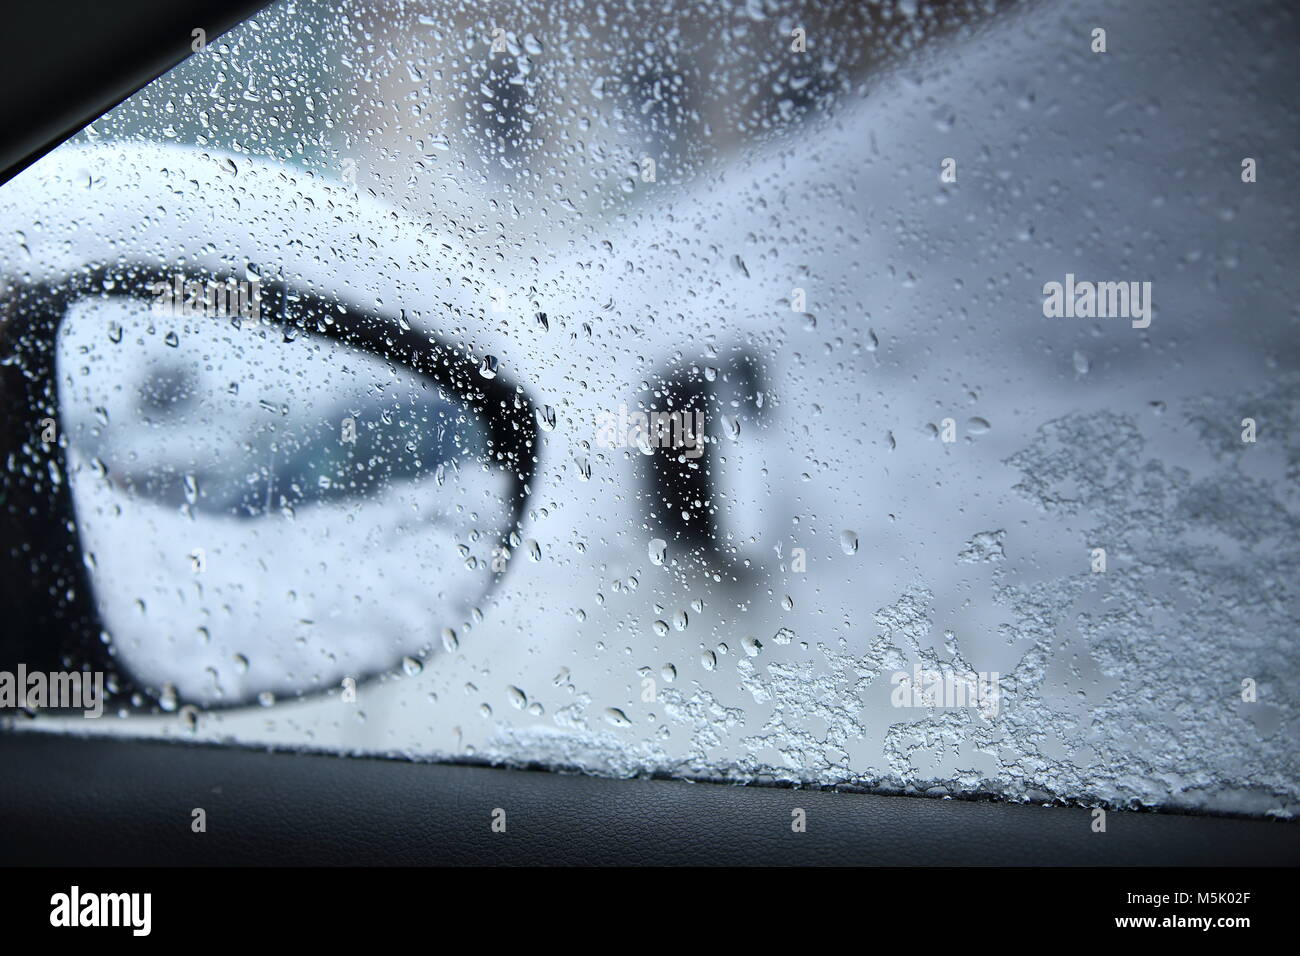 Water drops on car window close-up. Dangerous driving in bad weather conditions. Rainy weather outside car. Stock Photo